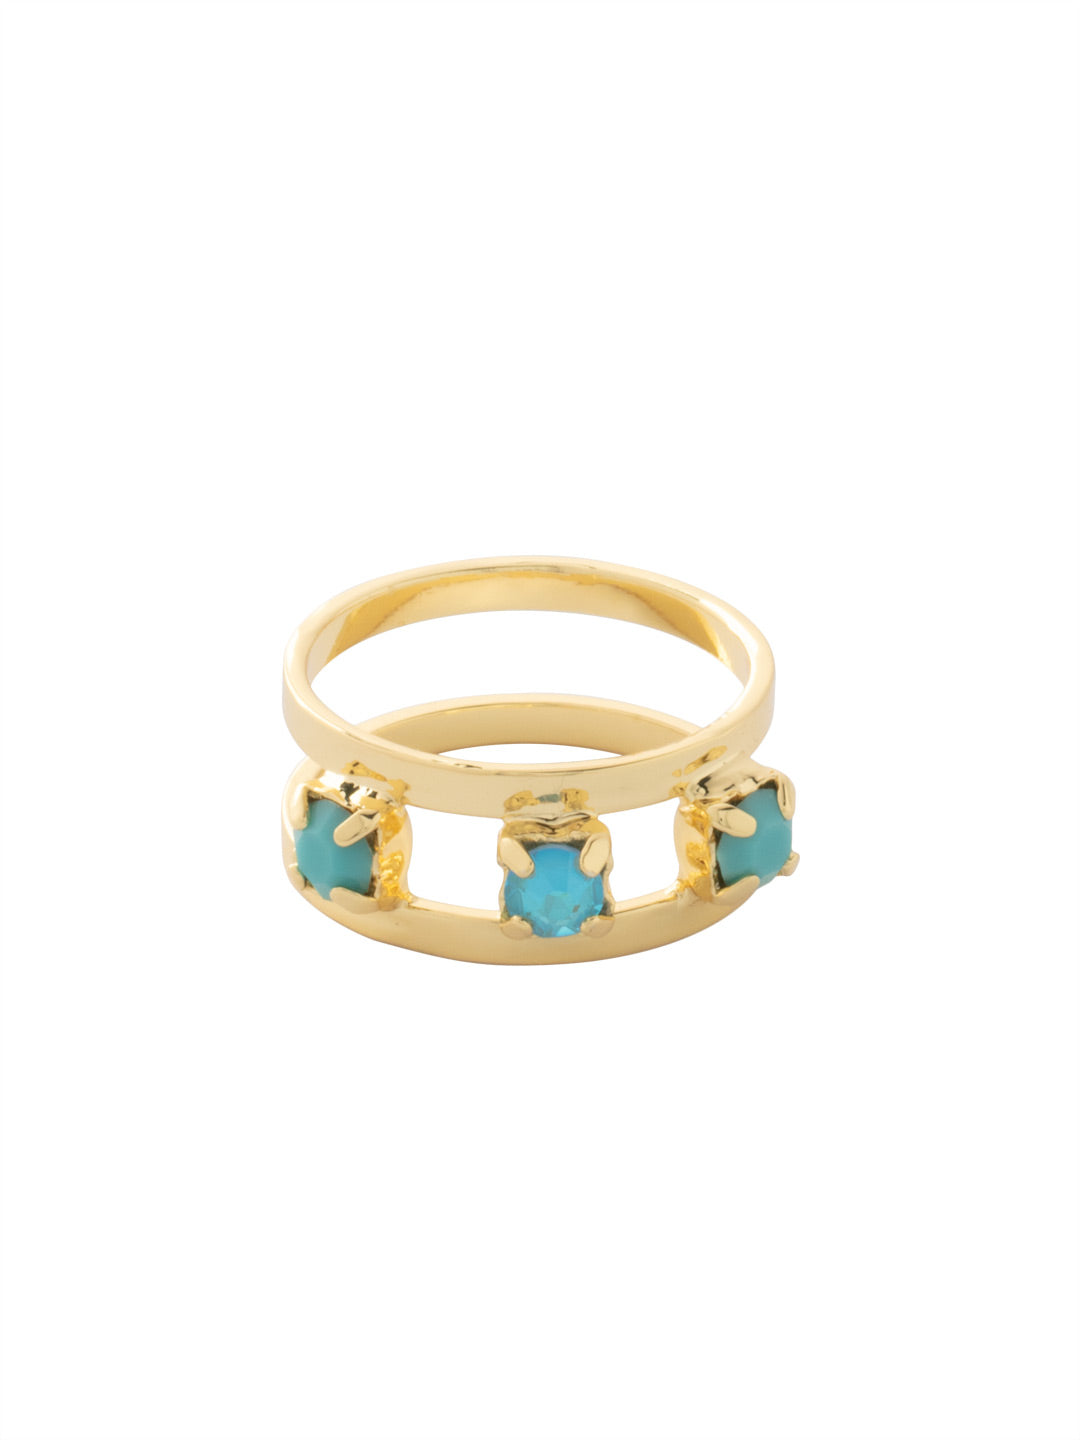 Aerie Stacked Ring - RFM6BGPRT - <p>The Aerie Stacked Ring features three studded round cut crystals nestled between two closed ring bands, creating a trendy stacked ring look. (ring size 7) From Sorrelli's Portofino collection in our Bright Gold-tone finish.</p>